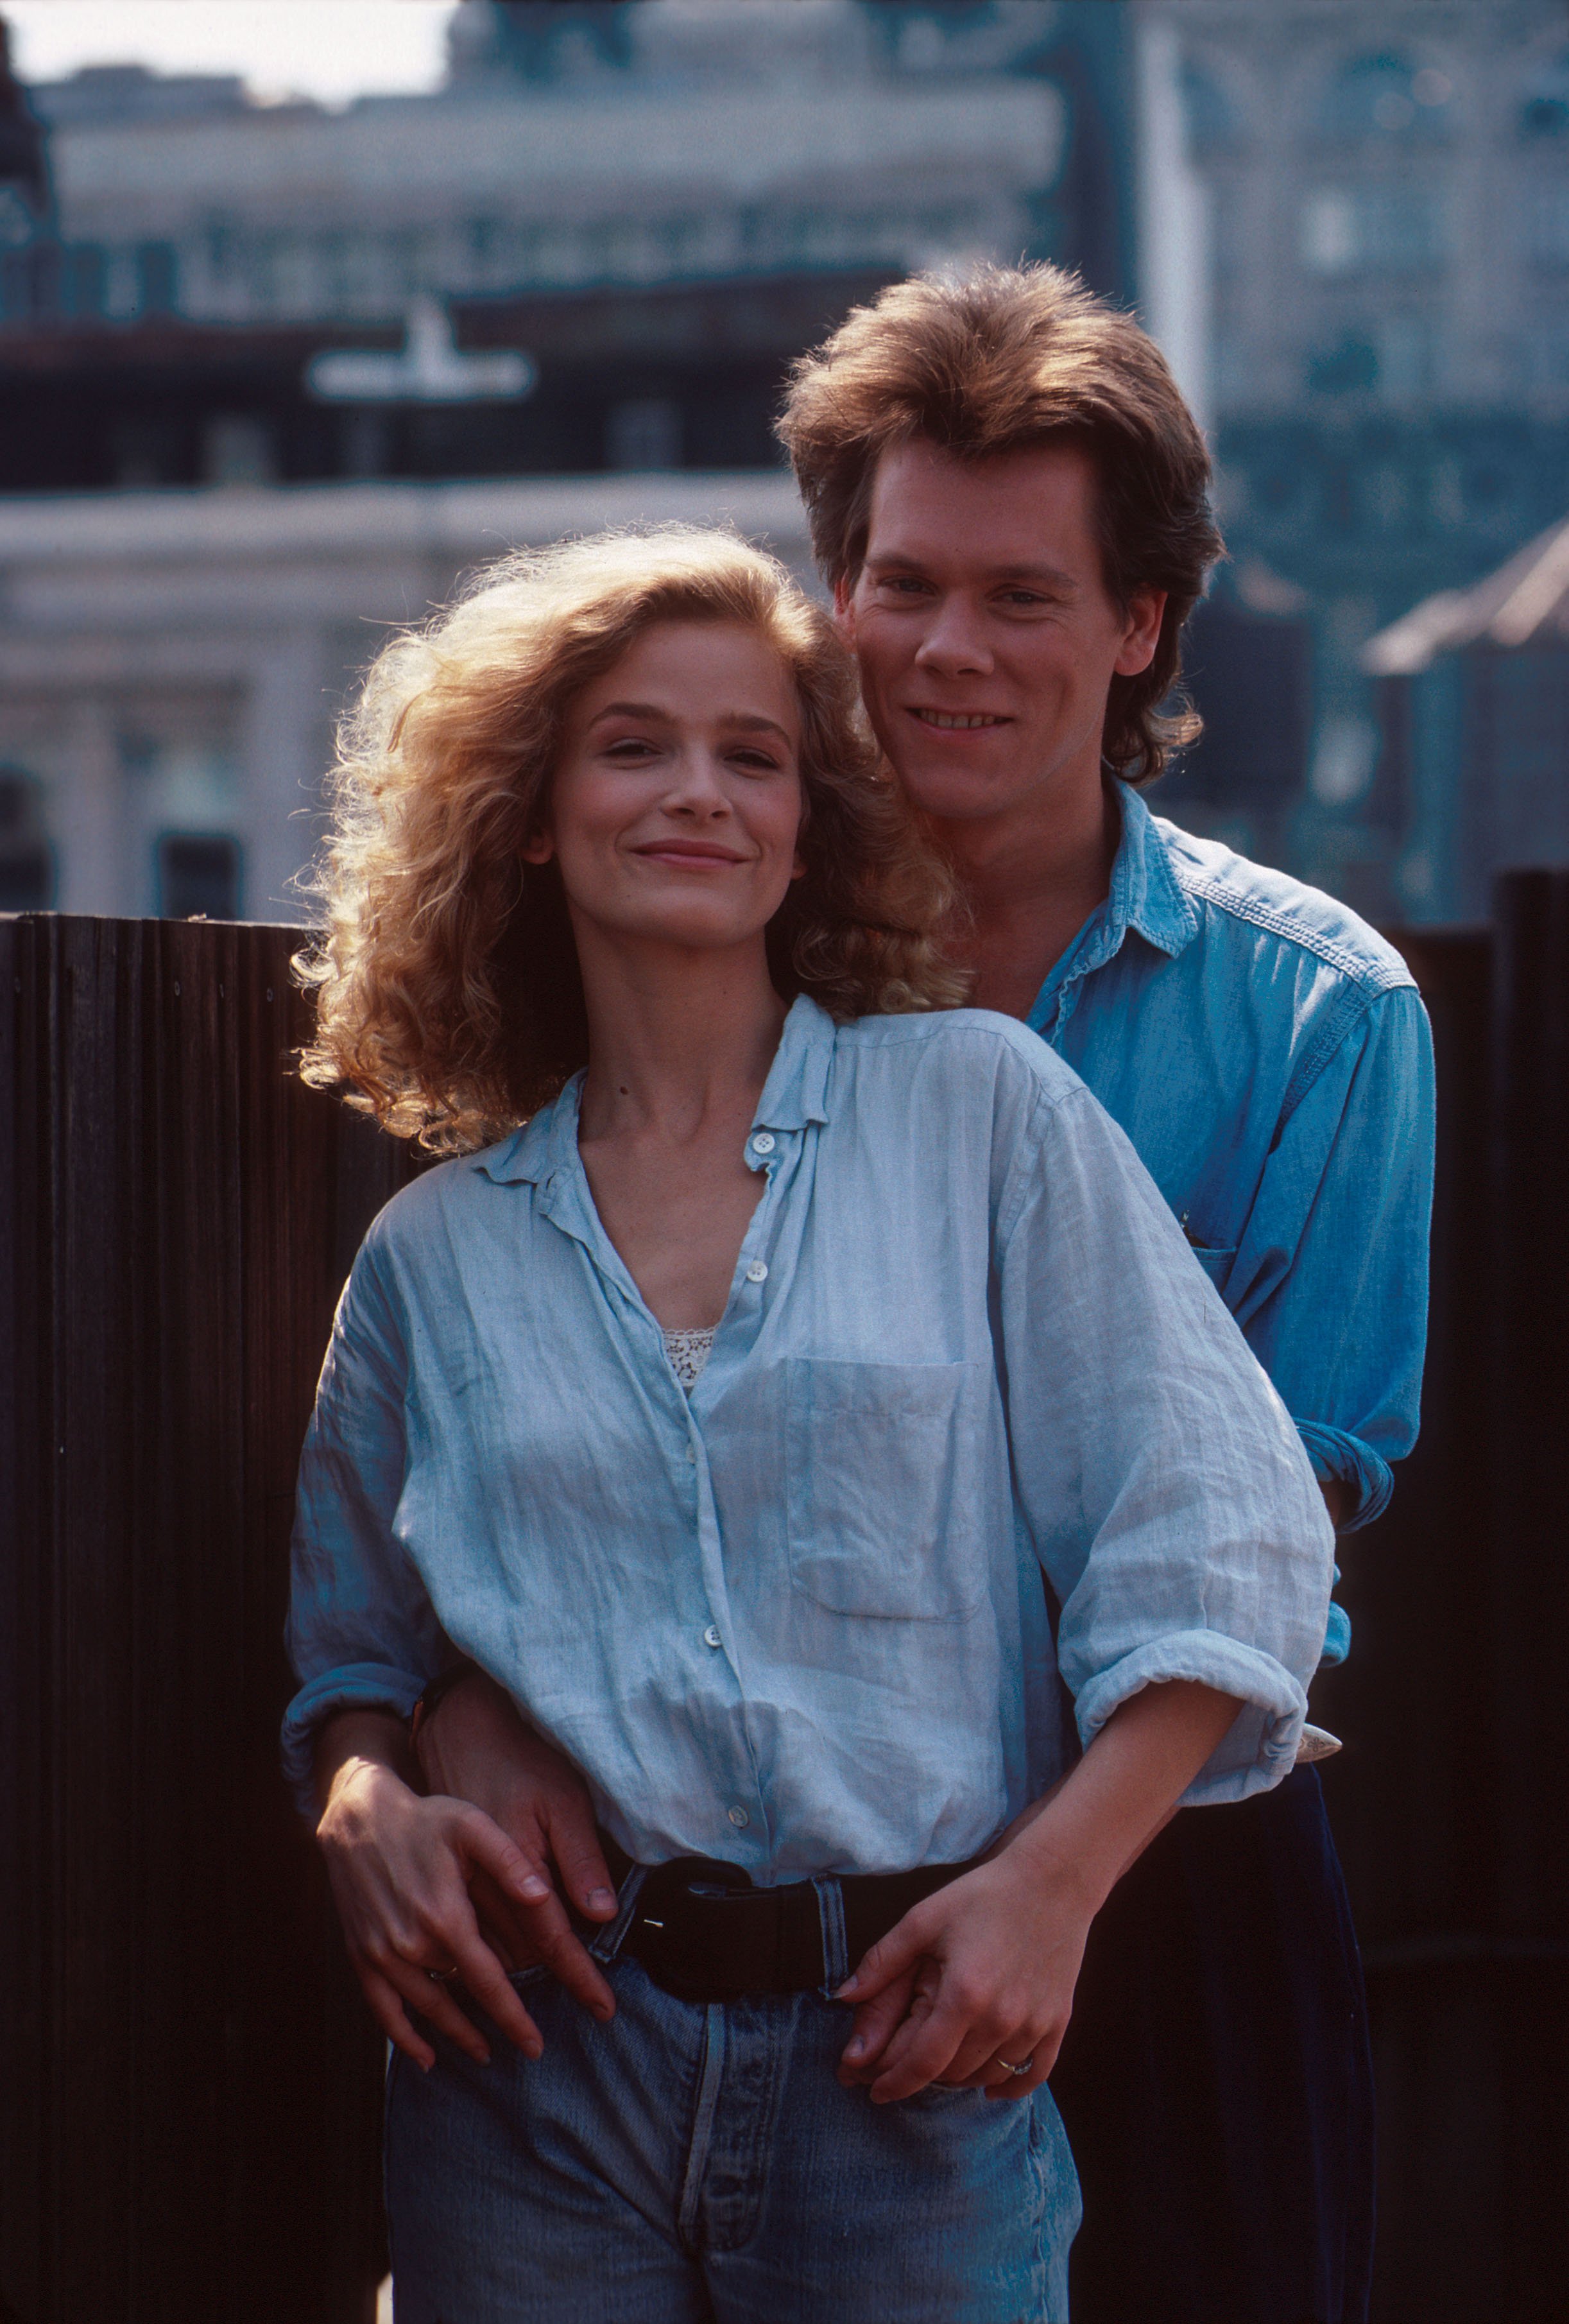 Kevin Bacon and Kyra Sedgwick together in 1988. | Source: Getty Images